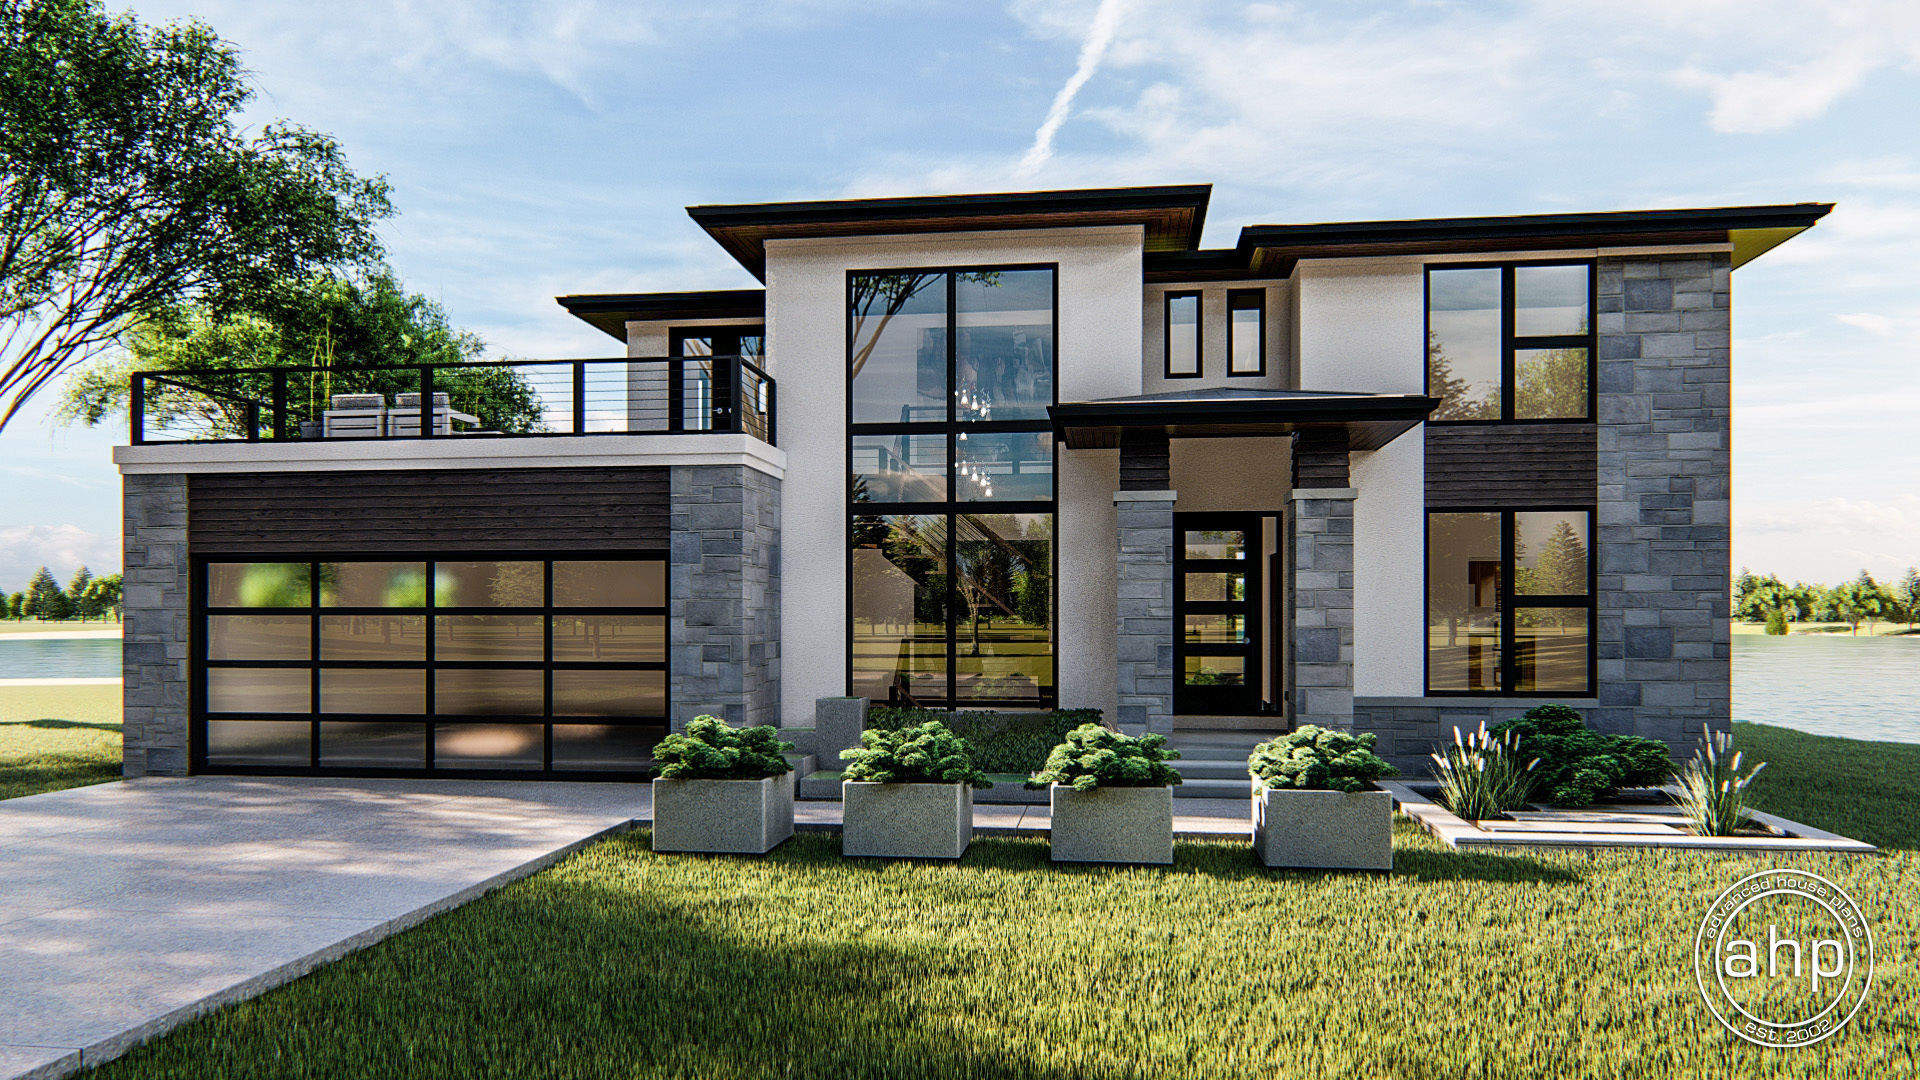 4 Bedroom 1.5 Story Modern Prairie House Plan with Party Dec